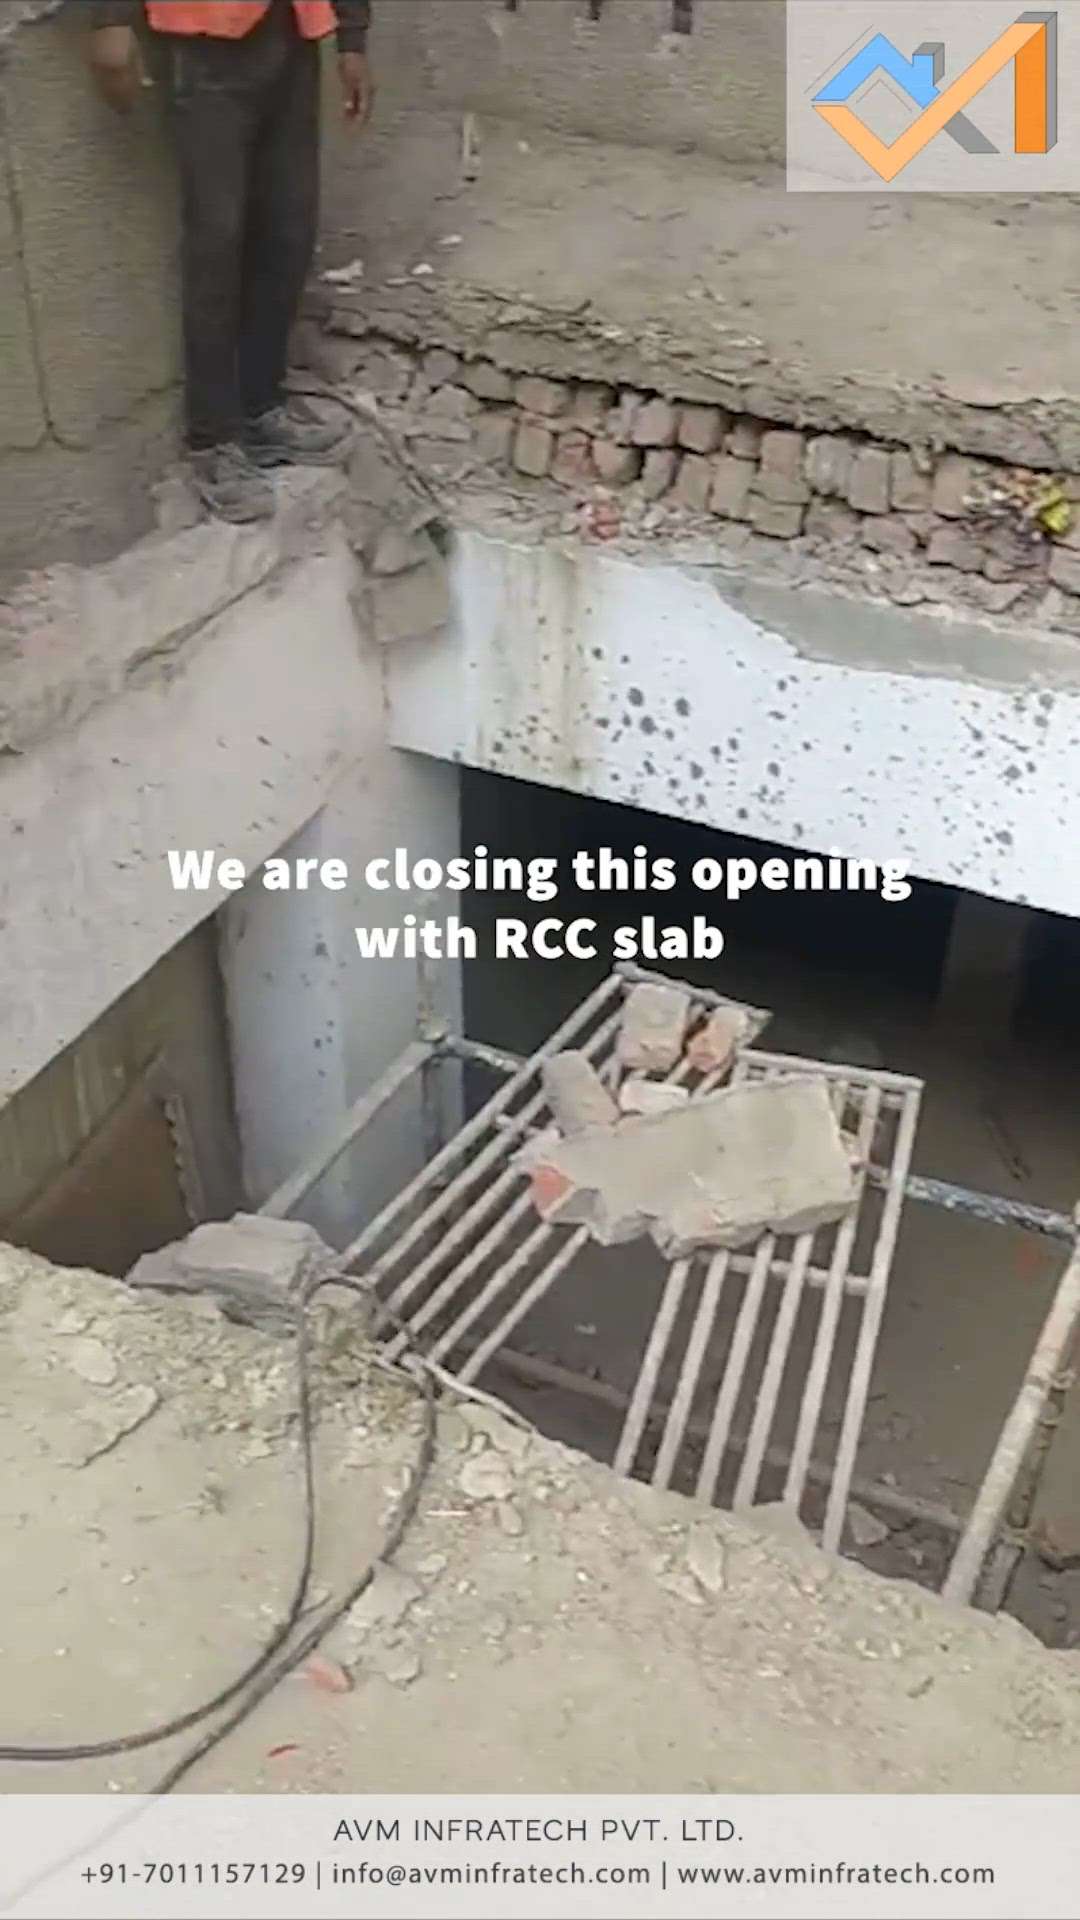 Casting slab in openings.


Follow us for more such amazing updates
.
.
#casting #slab #slabs #slabcasting #slabcastingday #slabcastingcomplete #rcc #rccwork #concrete #concreteconstruction #construction #chemicalanchor #anchoring #rebar #steelbar #civilengineering #avminfratech